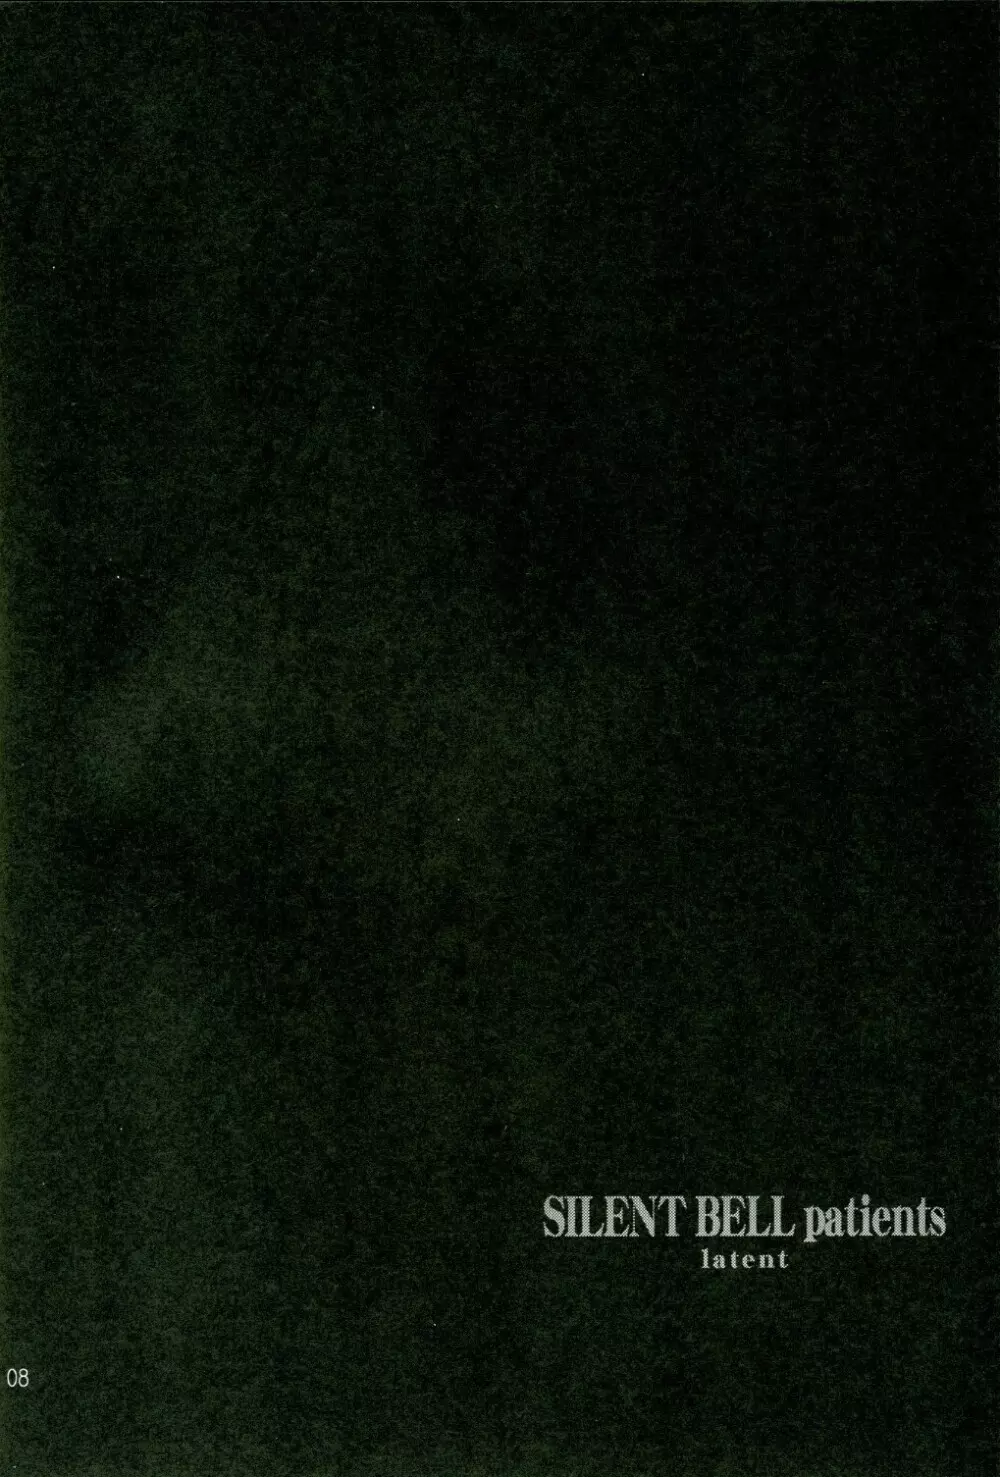 SILENT BELL patients - page7